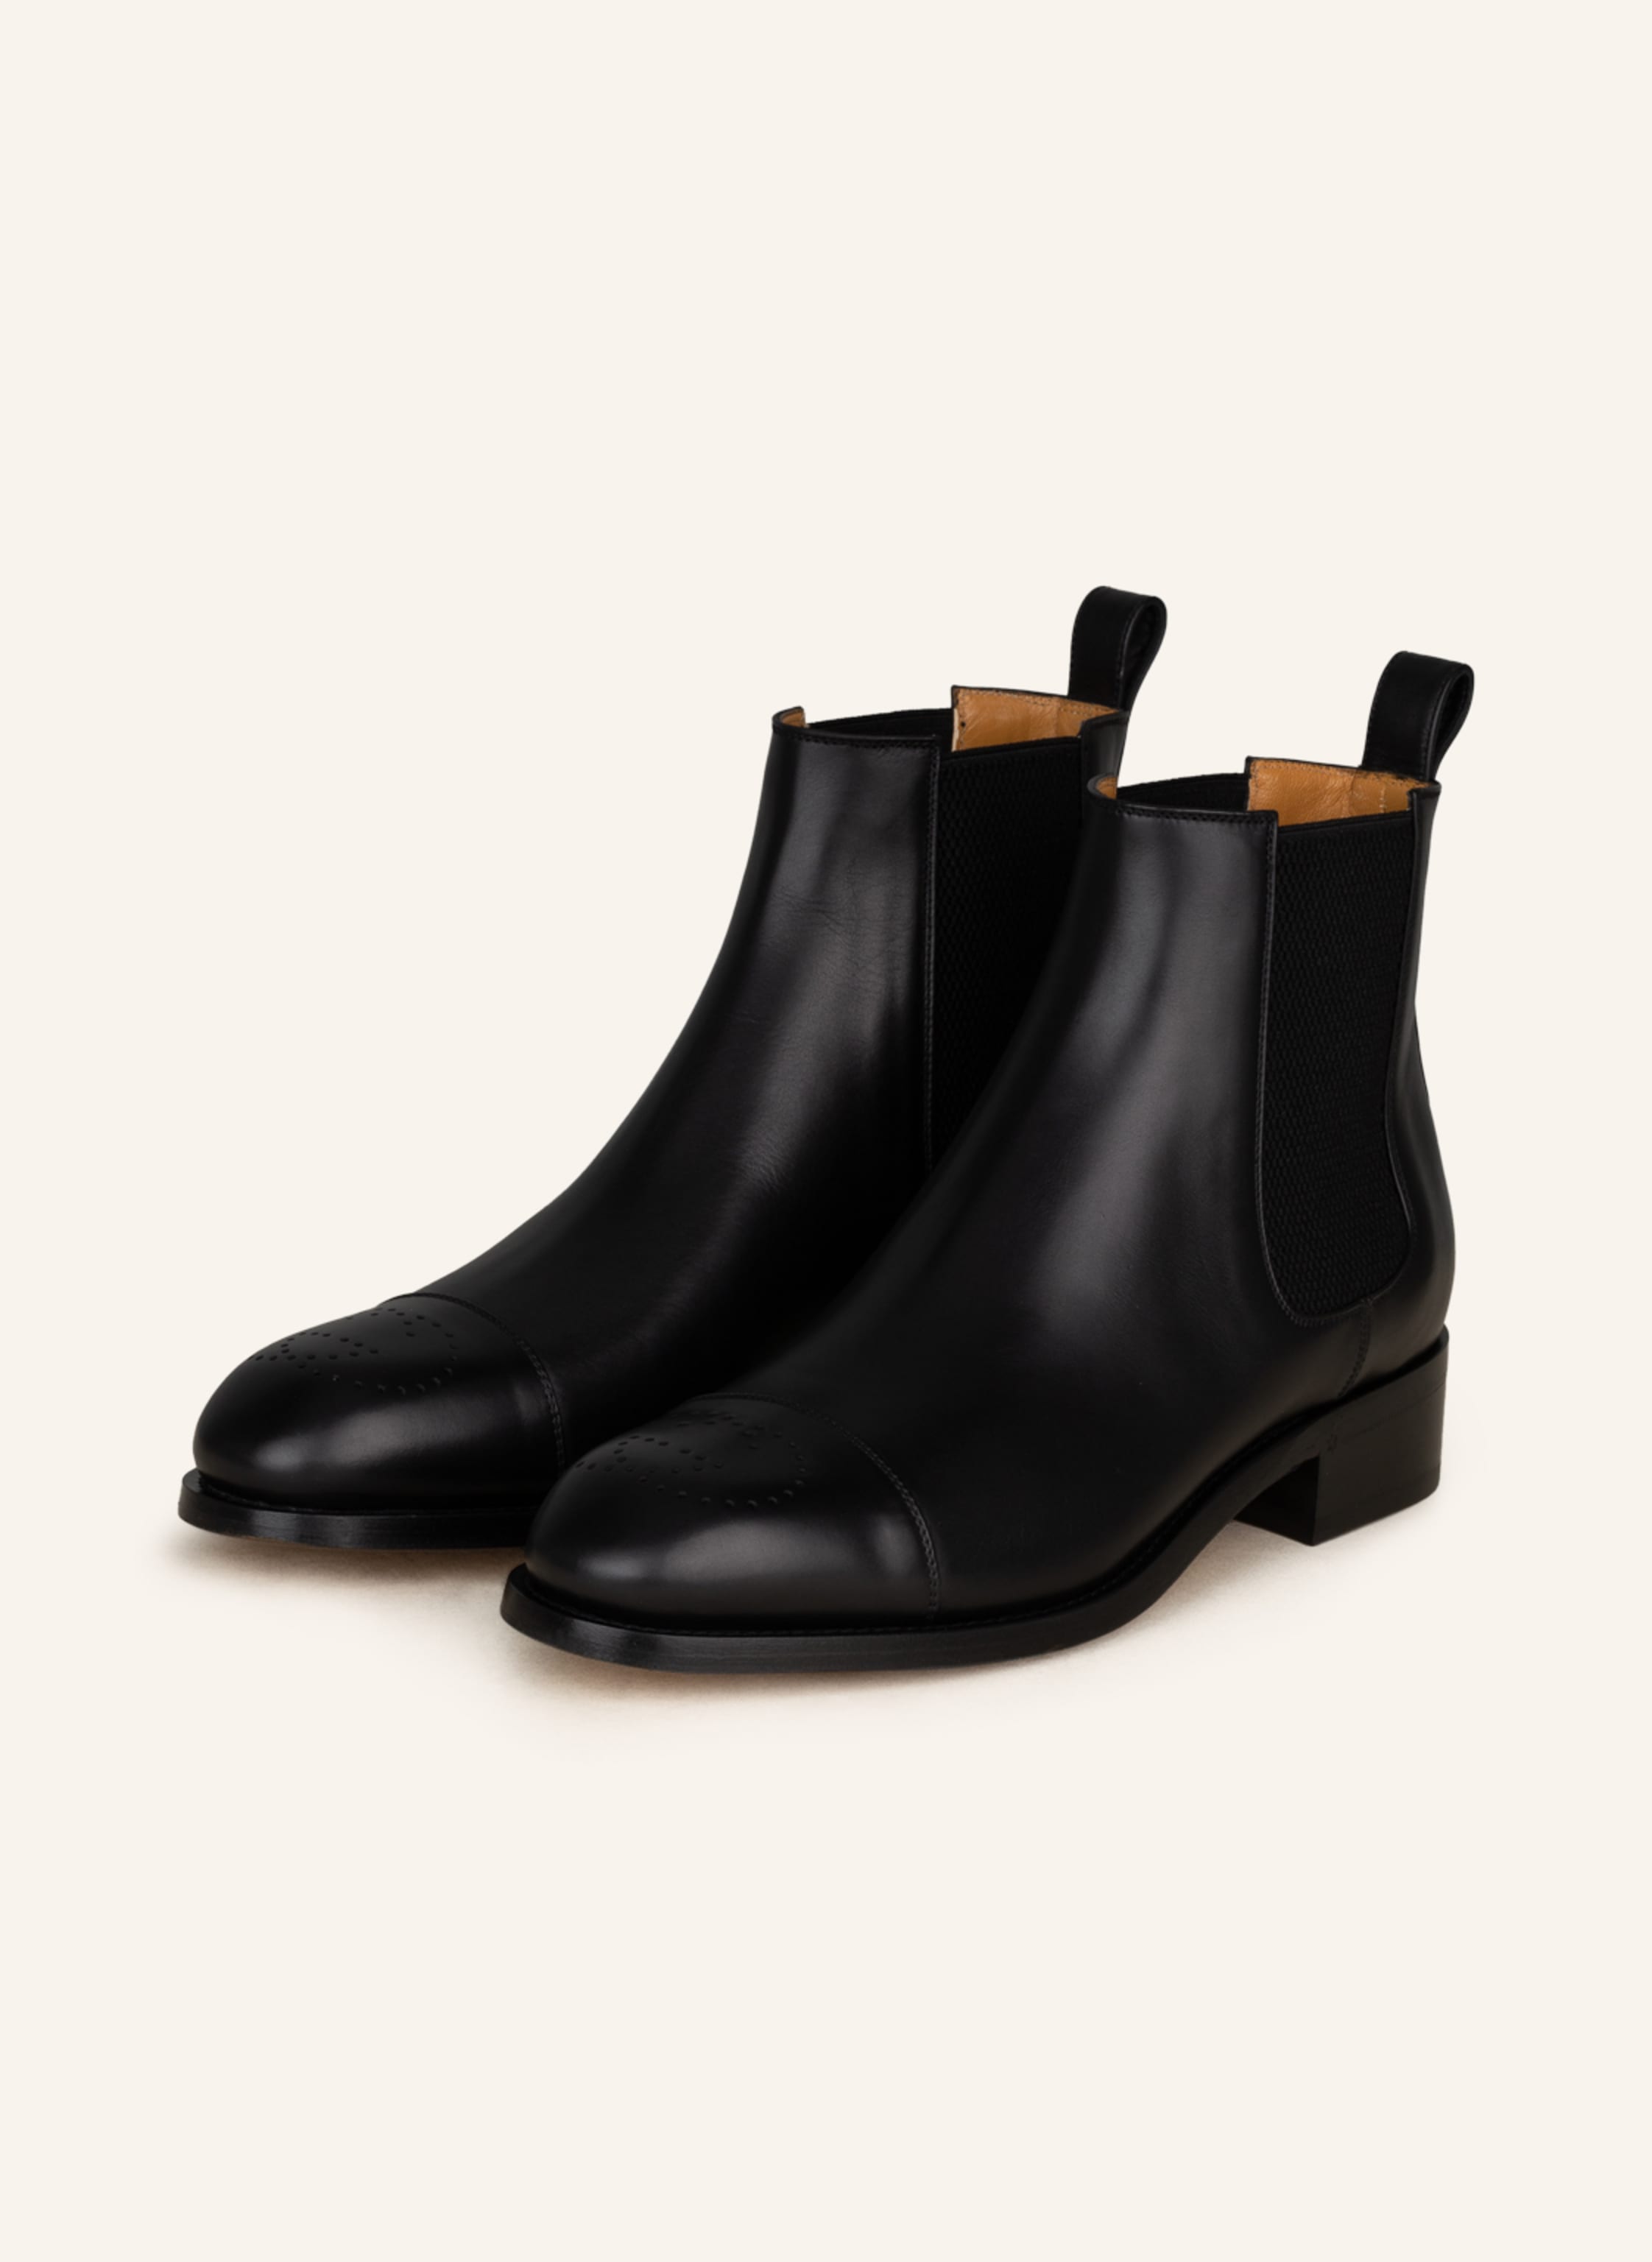 GUCCI boots ZOWIE in nero/black